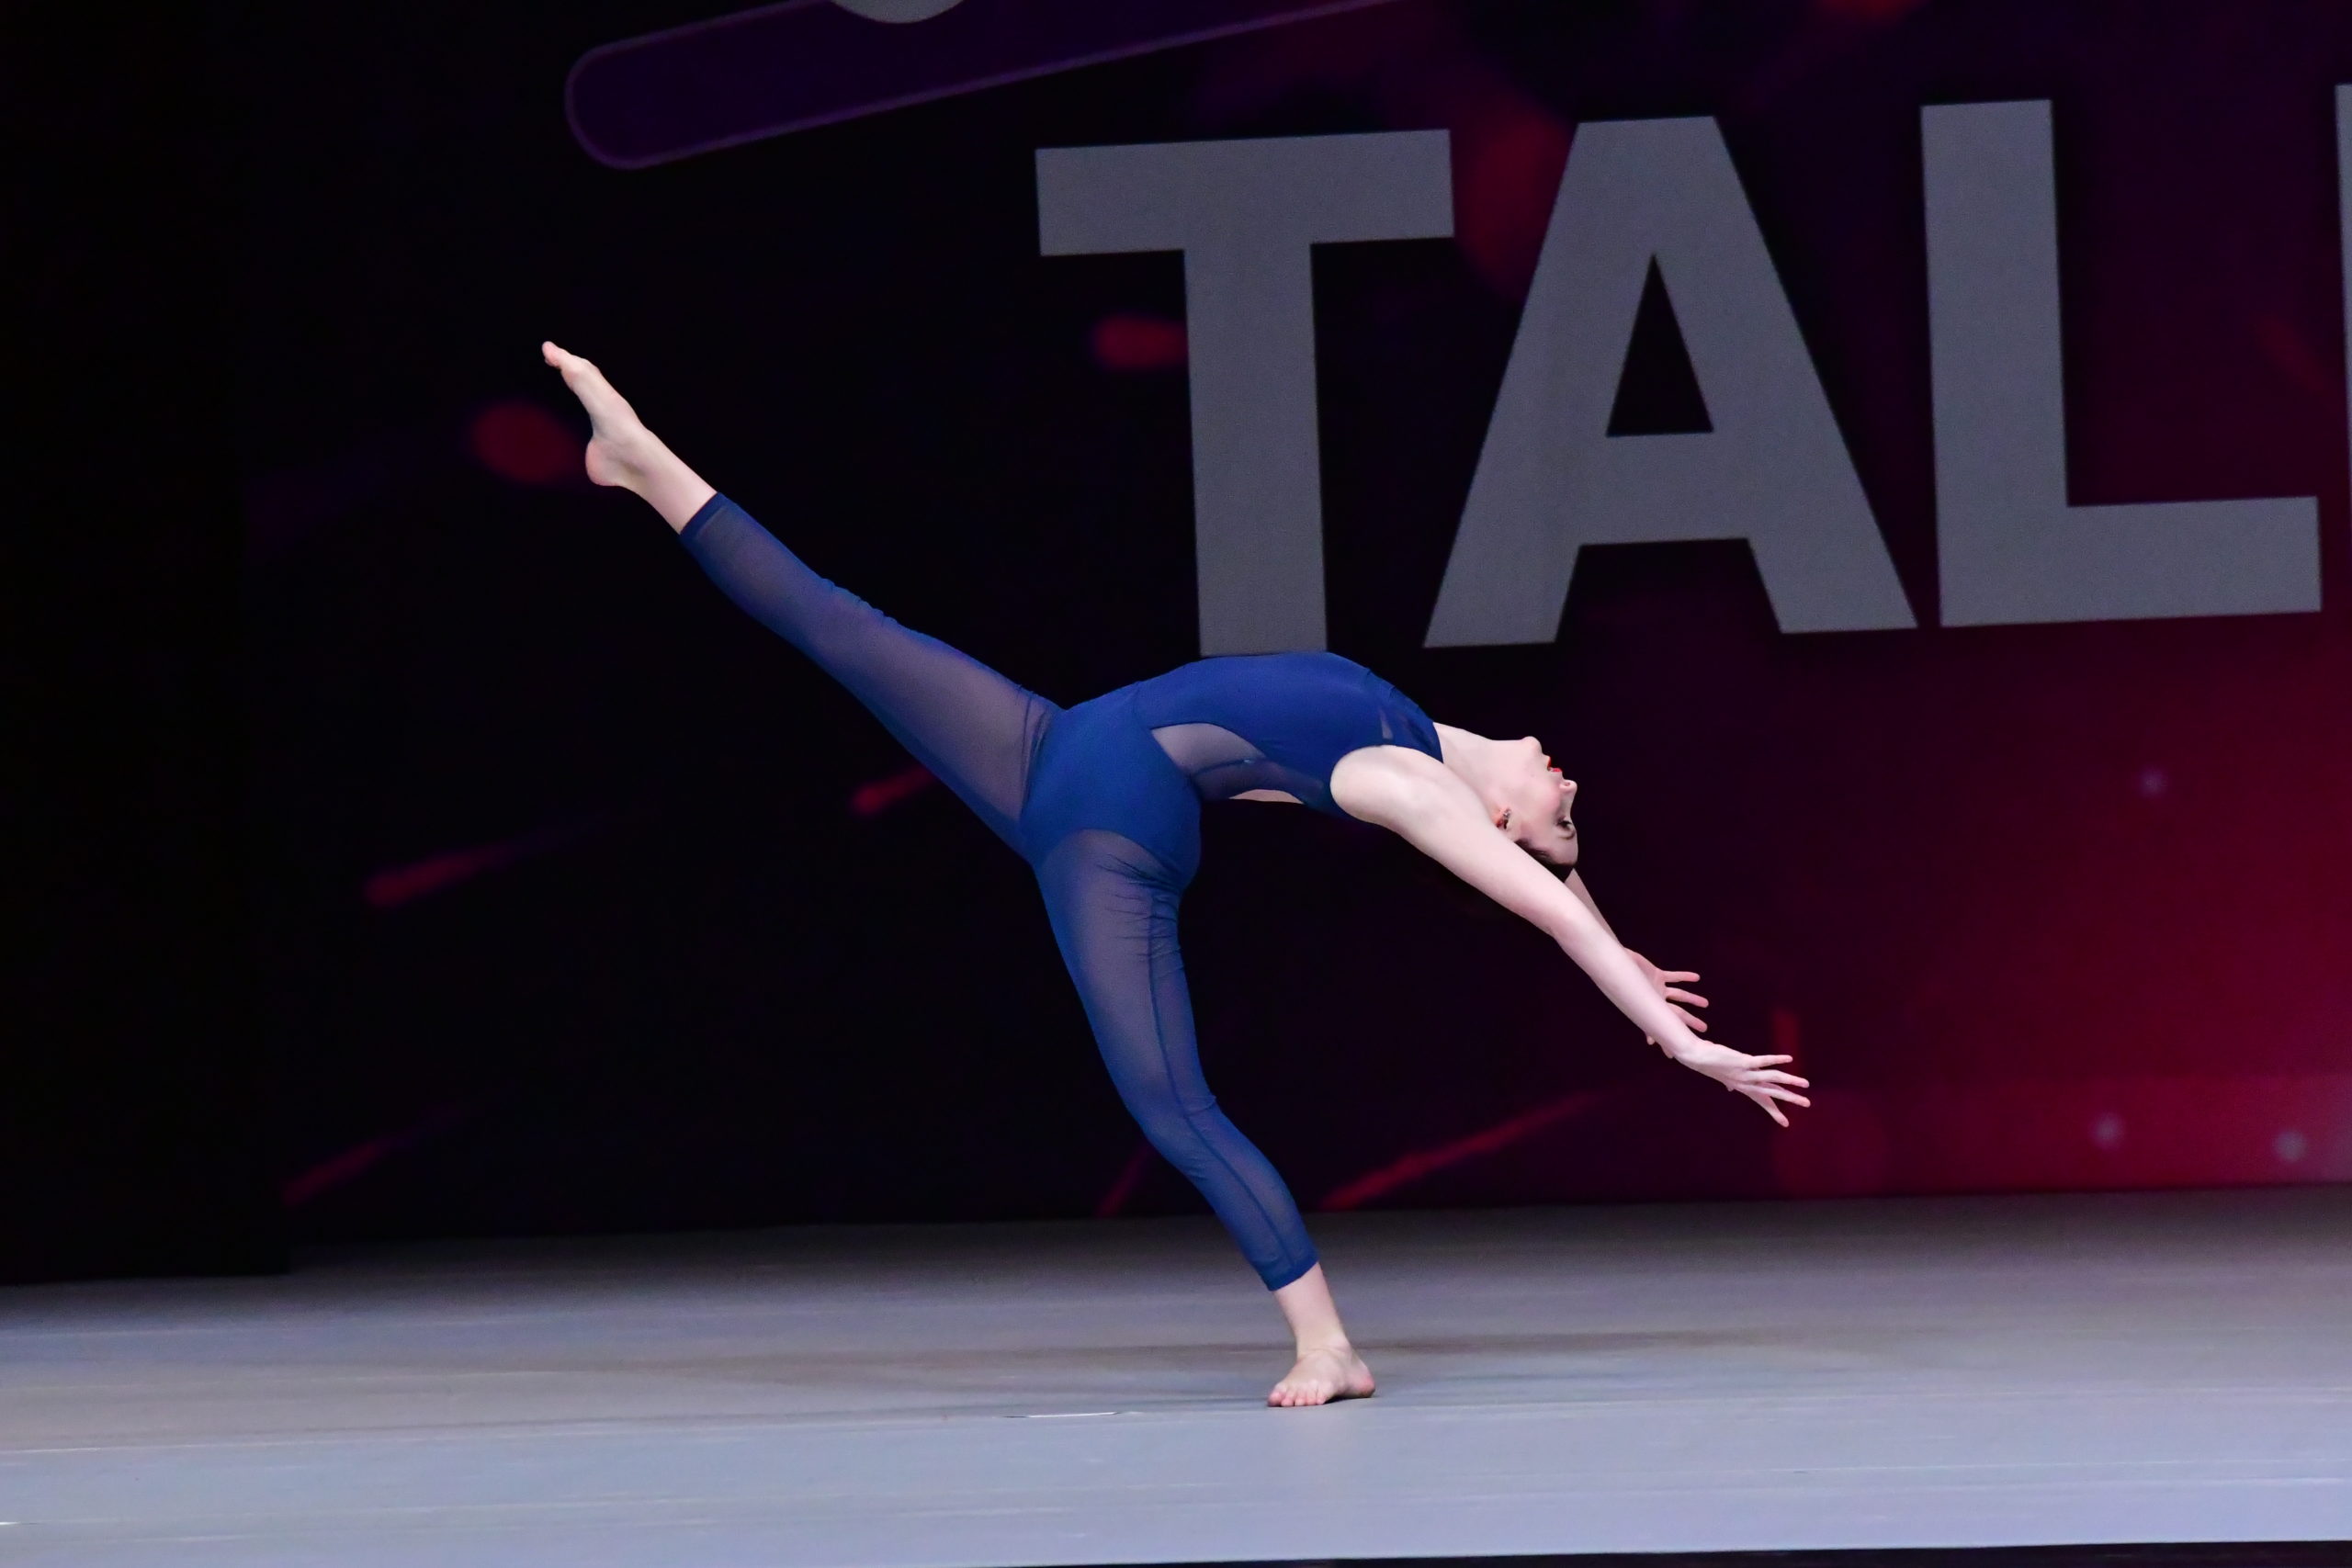 A dancer in a blue leotard and blue tights extends her leg in the air, arching back towards the floor. She is on a competition stage, with the "Applause Talent" backdrop